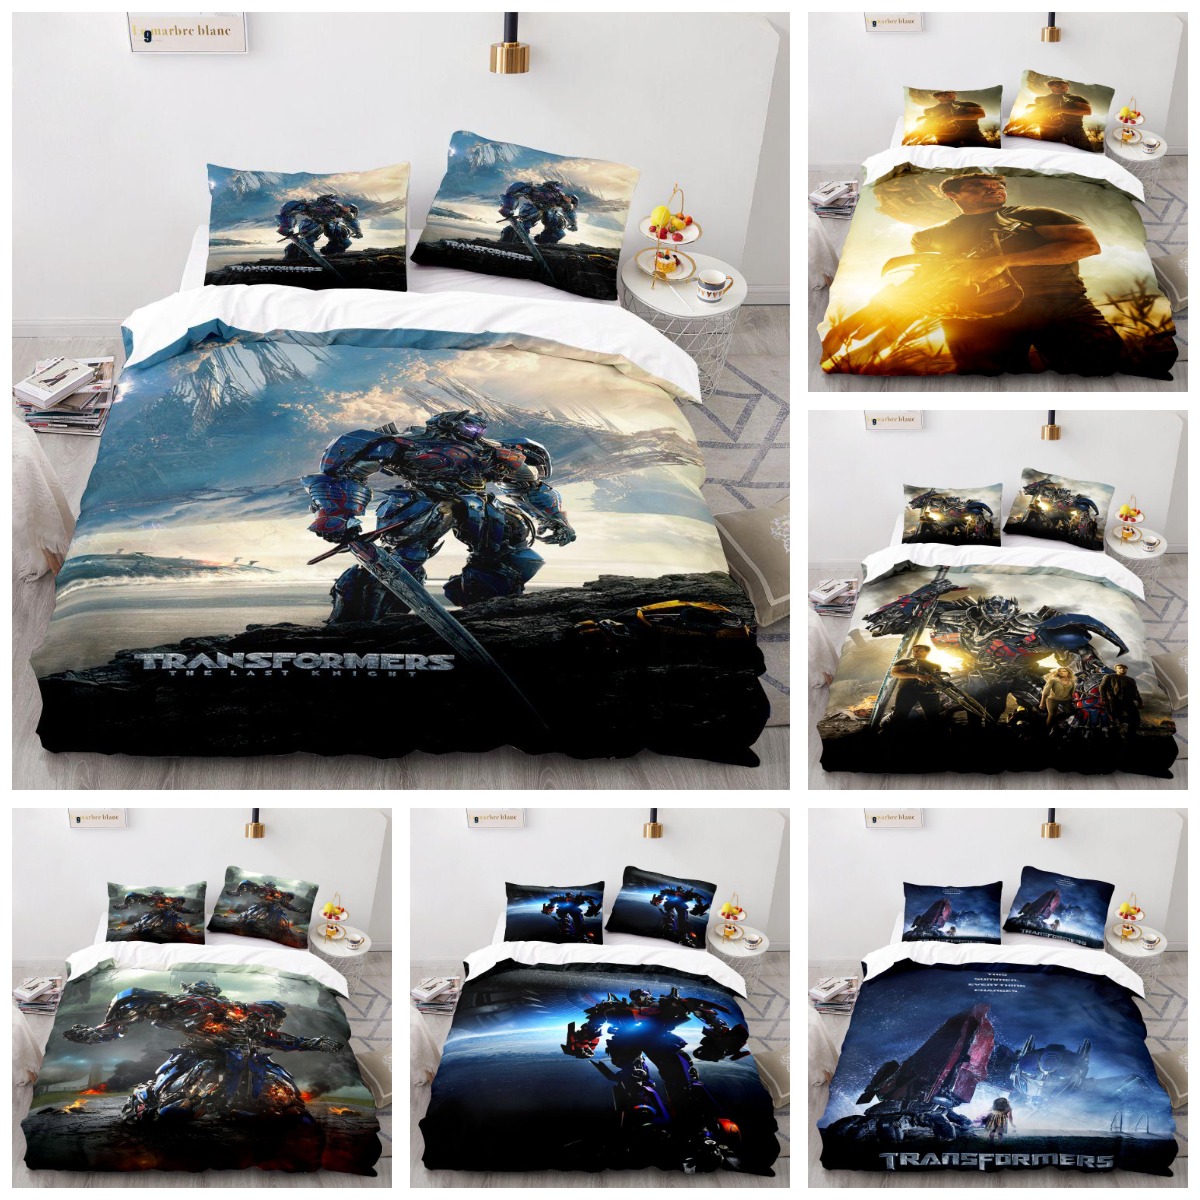 3D Digital Printing Bedding Sets Transformers Themed Polyester Duvet Cover Set 3PC European and American Style Super Soft Quilt Cover with Pillowcase